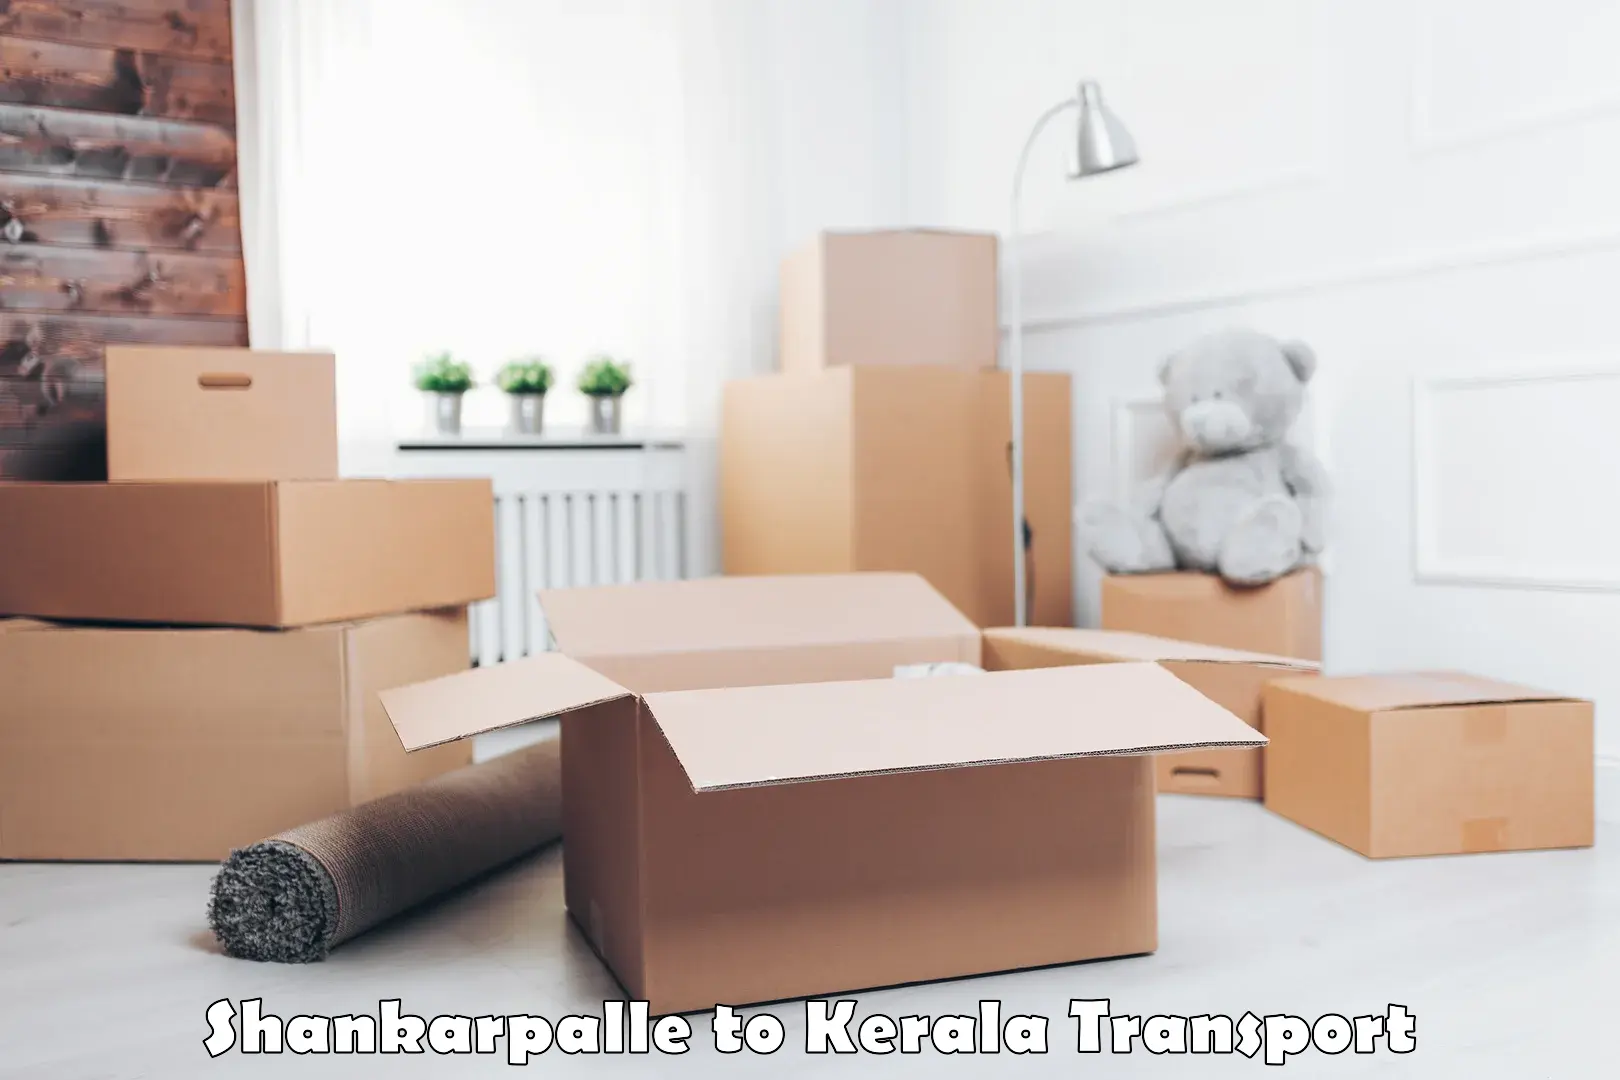 Express transport services Shankarpalle to Palakkad